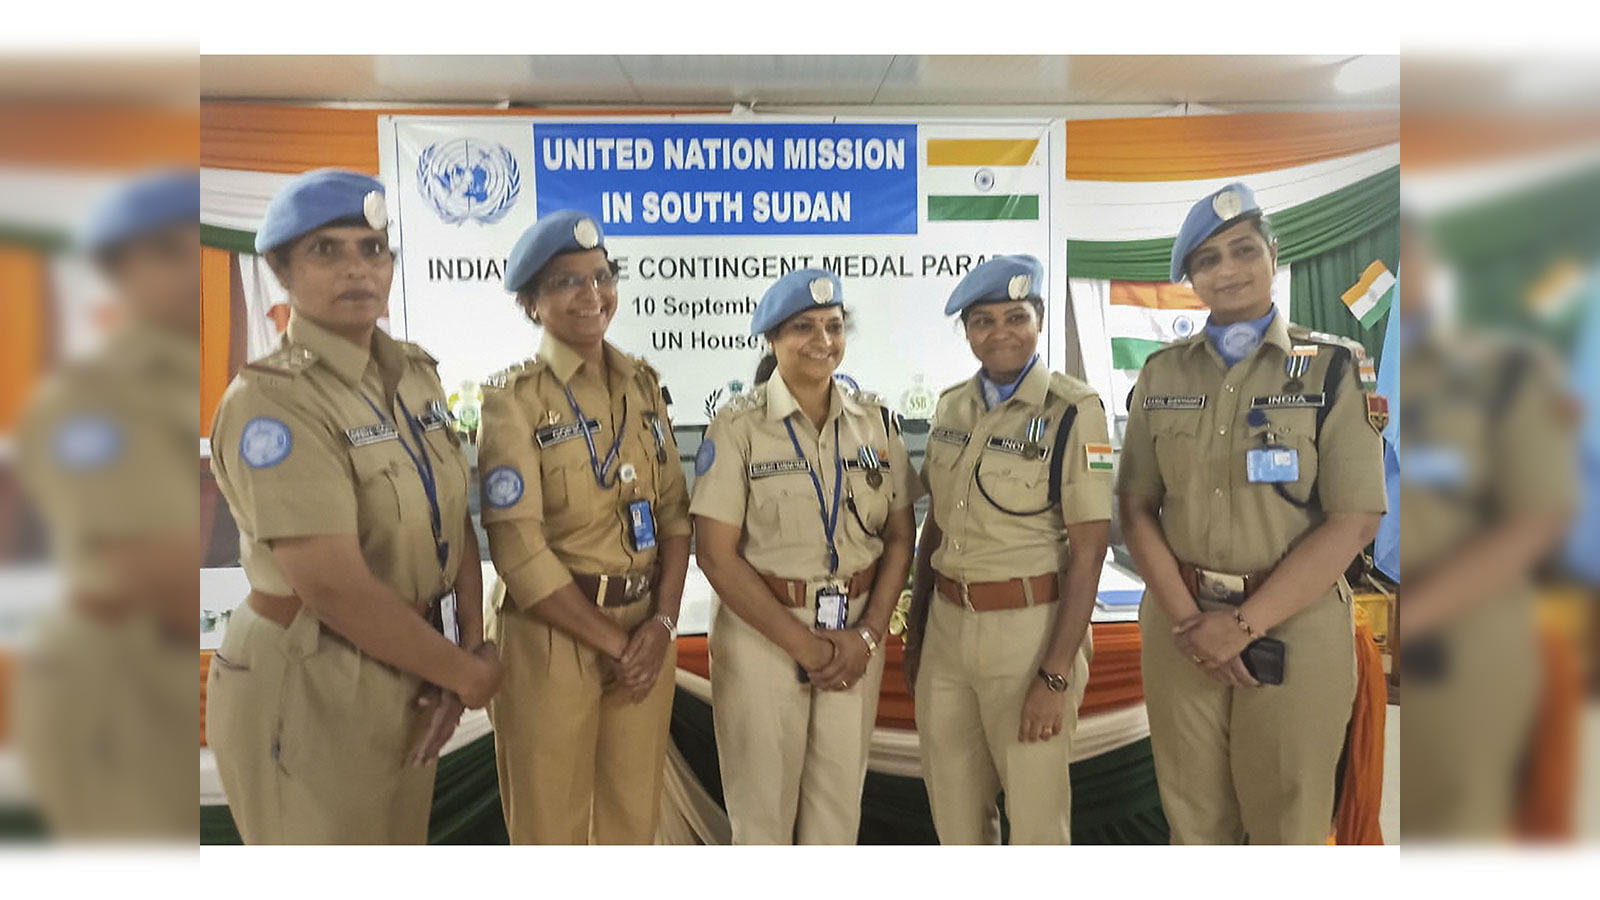 united nations: 5 Indian women police officers honoured by UN for role in  South Sudan - The Economic Times